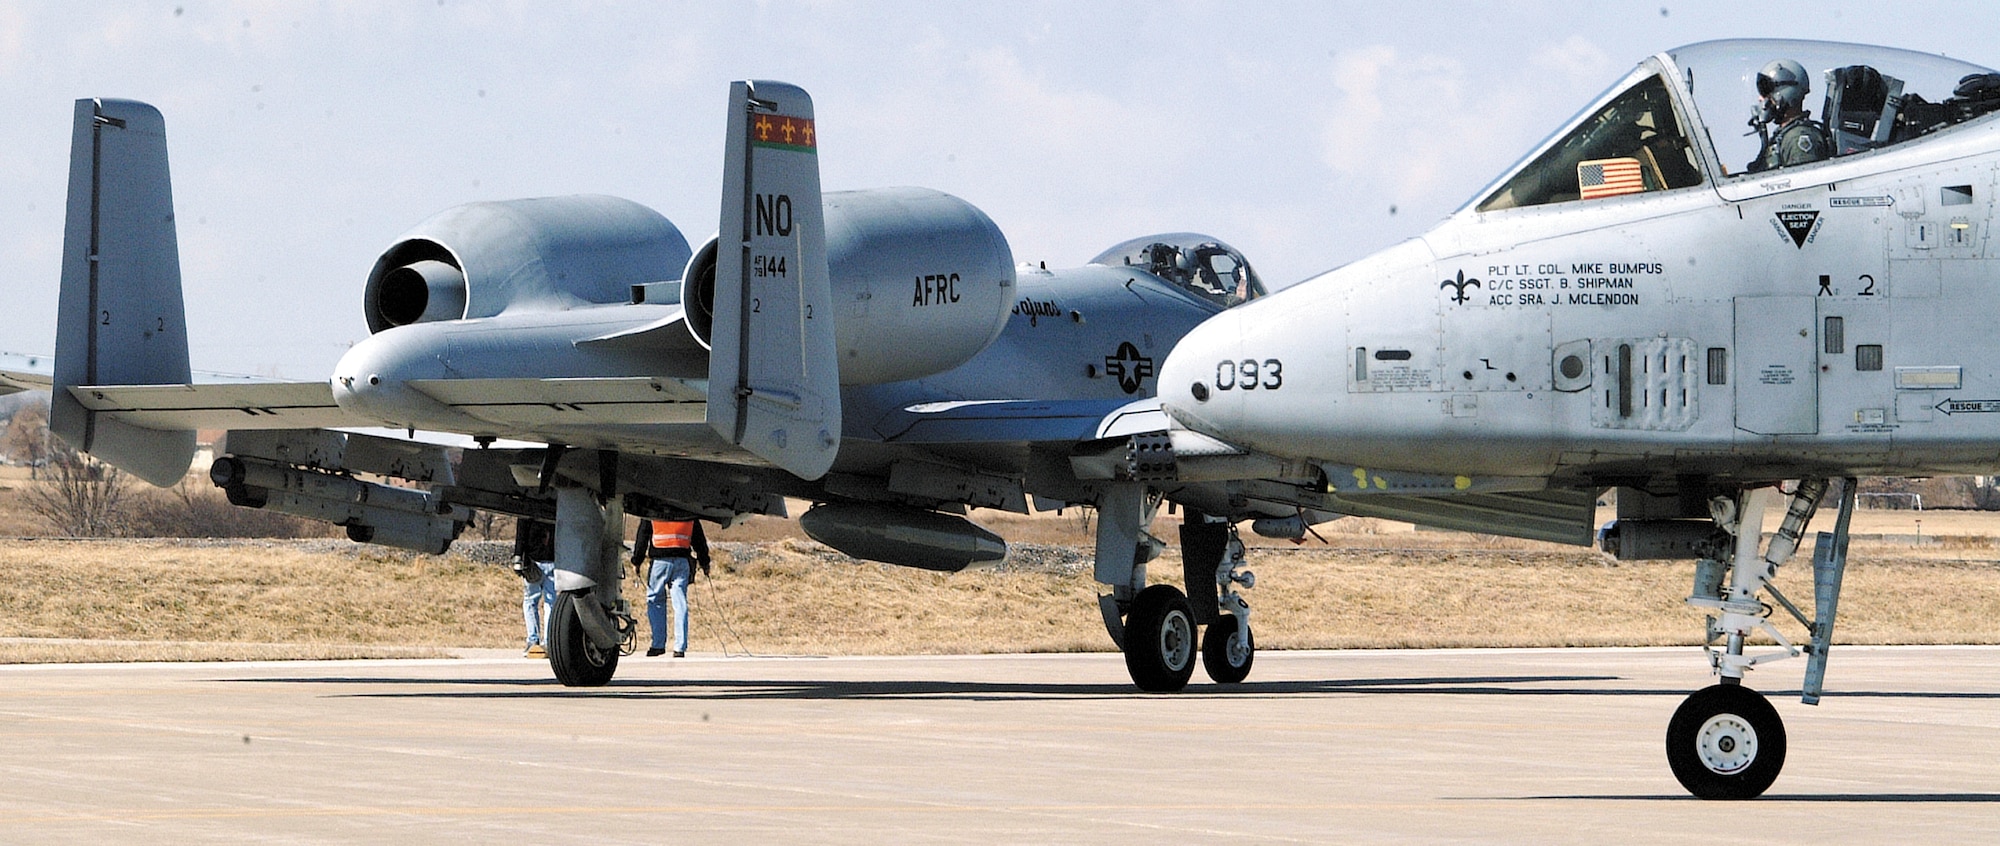 The first two A-10s from the 926th Fighter Wing based near New Orleans arrive at the 442nd Fighter Wing, an Air Force Reserve unit at Whiteman Air Force Base, Mo., Feb. 24.The 442nd Fighter Wing has since received six additional A-10s as part of the base realignment and closure decision. A ninth aircraft is scheduled to arrive in June.  The aircraft are on loan to 442nd pending a formal acceptance process, including an environmental impact statement. The 442nd FW is going from 15 aircraft assigned to a full squadron of 24 A-10 Thunderbolt IIs. (Photo by Master Sgt. Bill Huntington) 